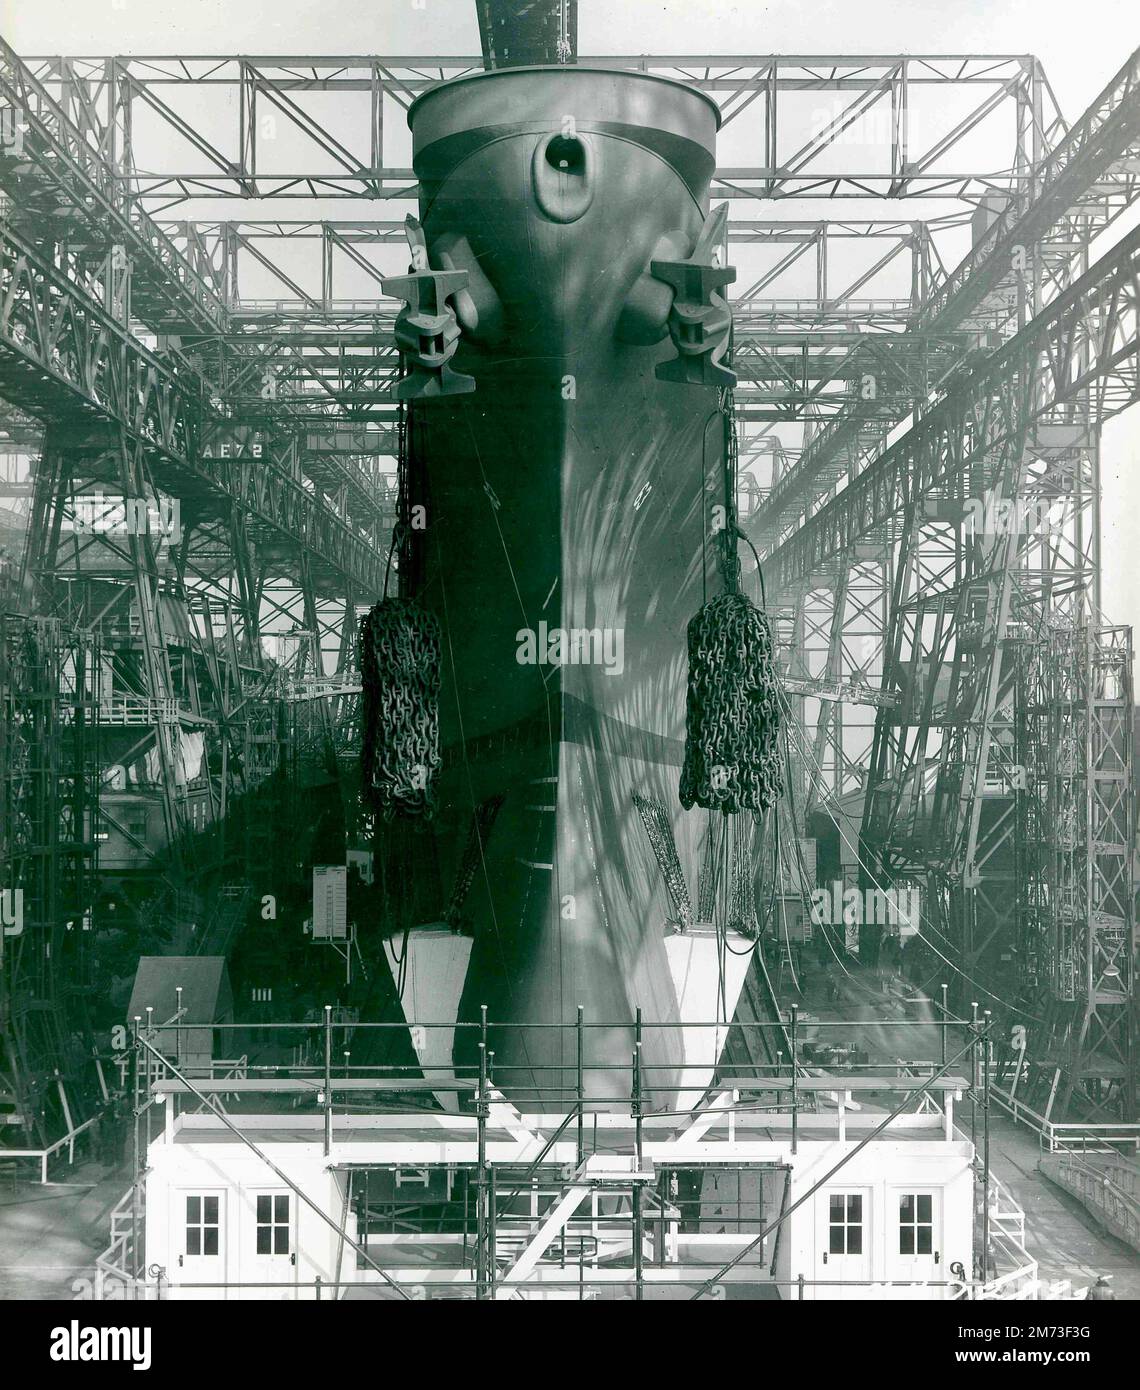 Bow view of the USS Missouri under construction in the New York Naval Yard - January 27, 1944 Stock Photo